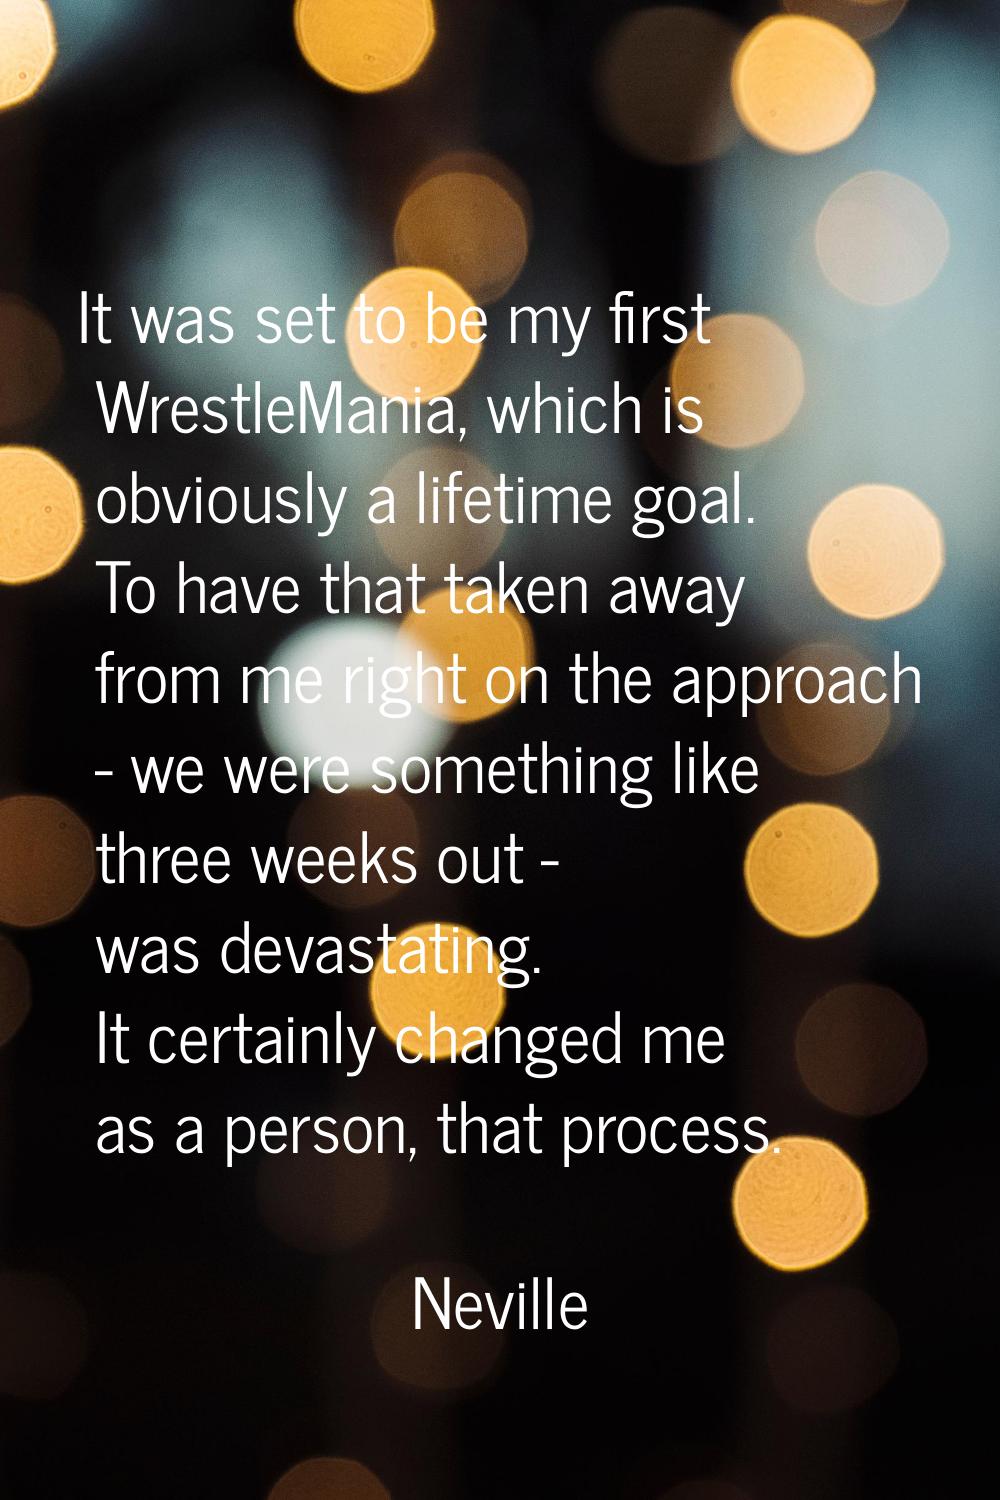 It was set to be my first WrestleMania, which is obviously a lifetime goal. To have that taken away